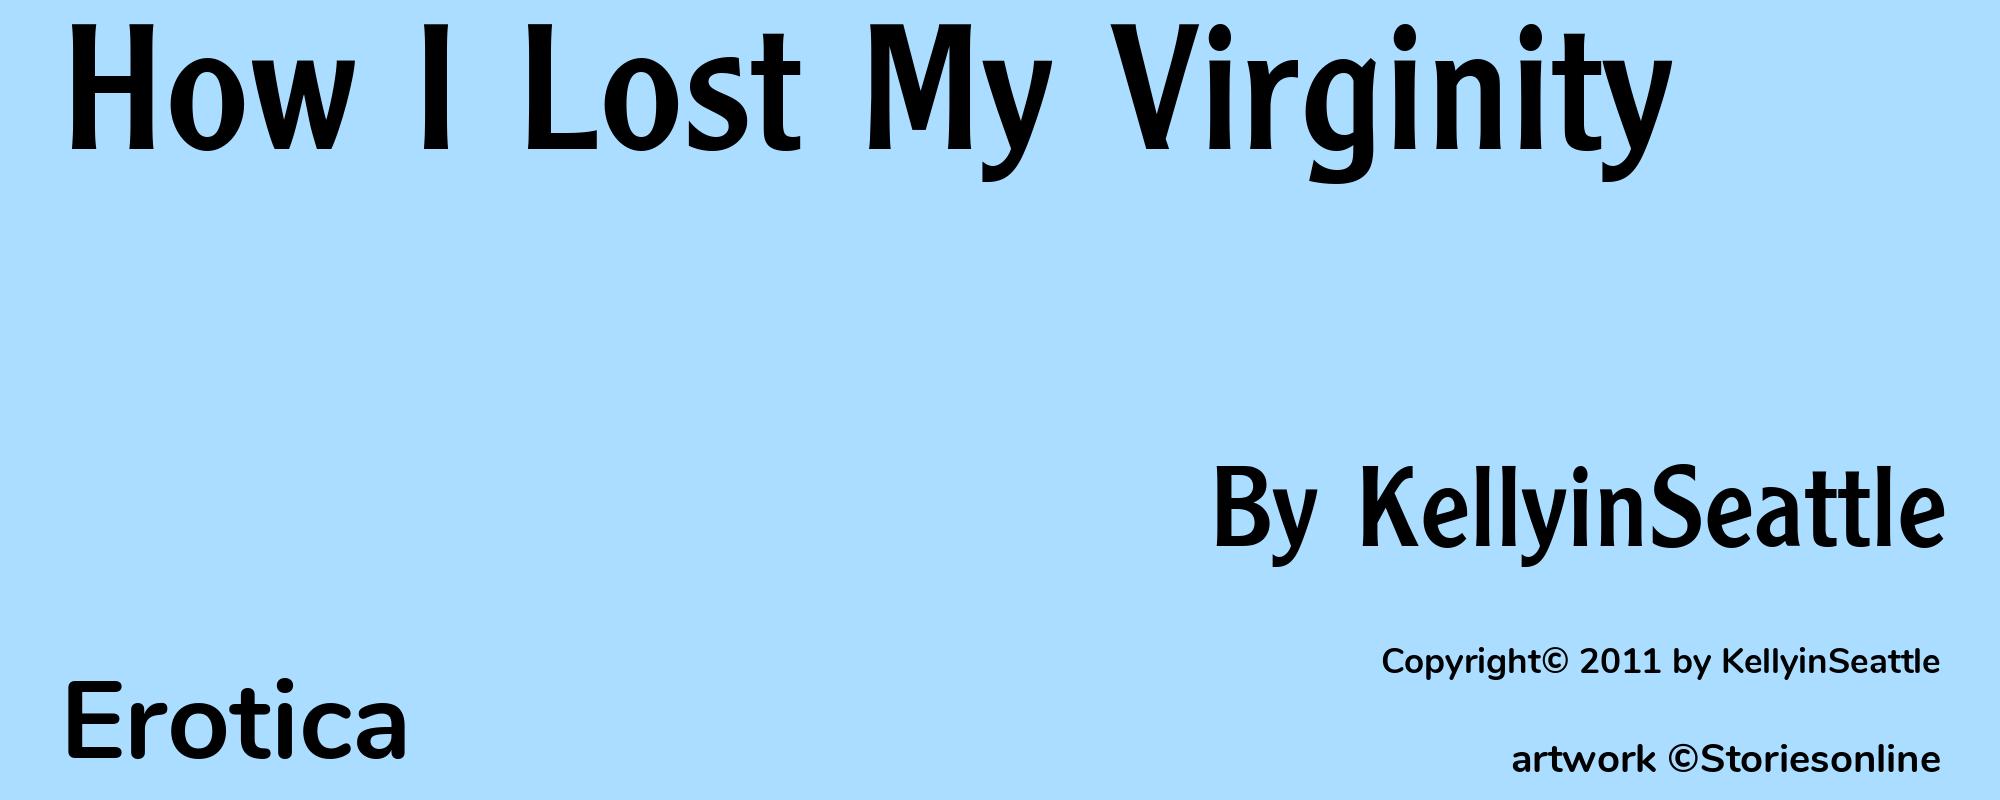 How I Lost My Virginity - Cover